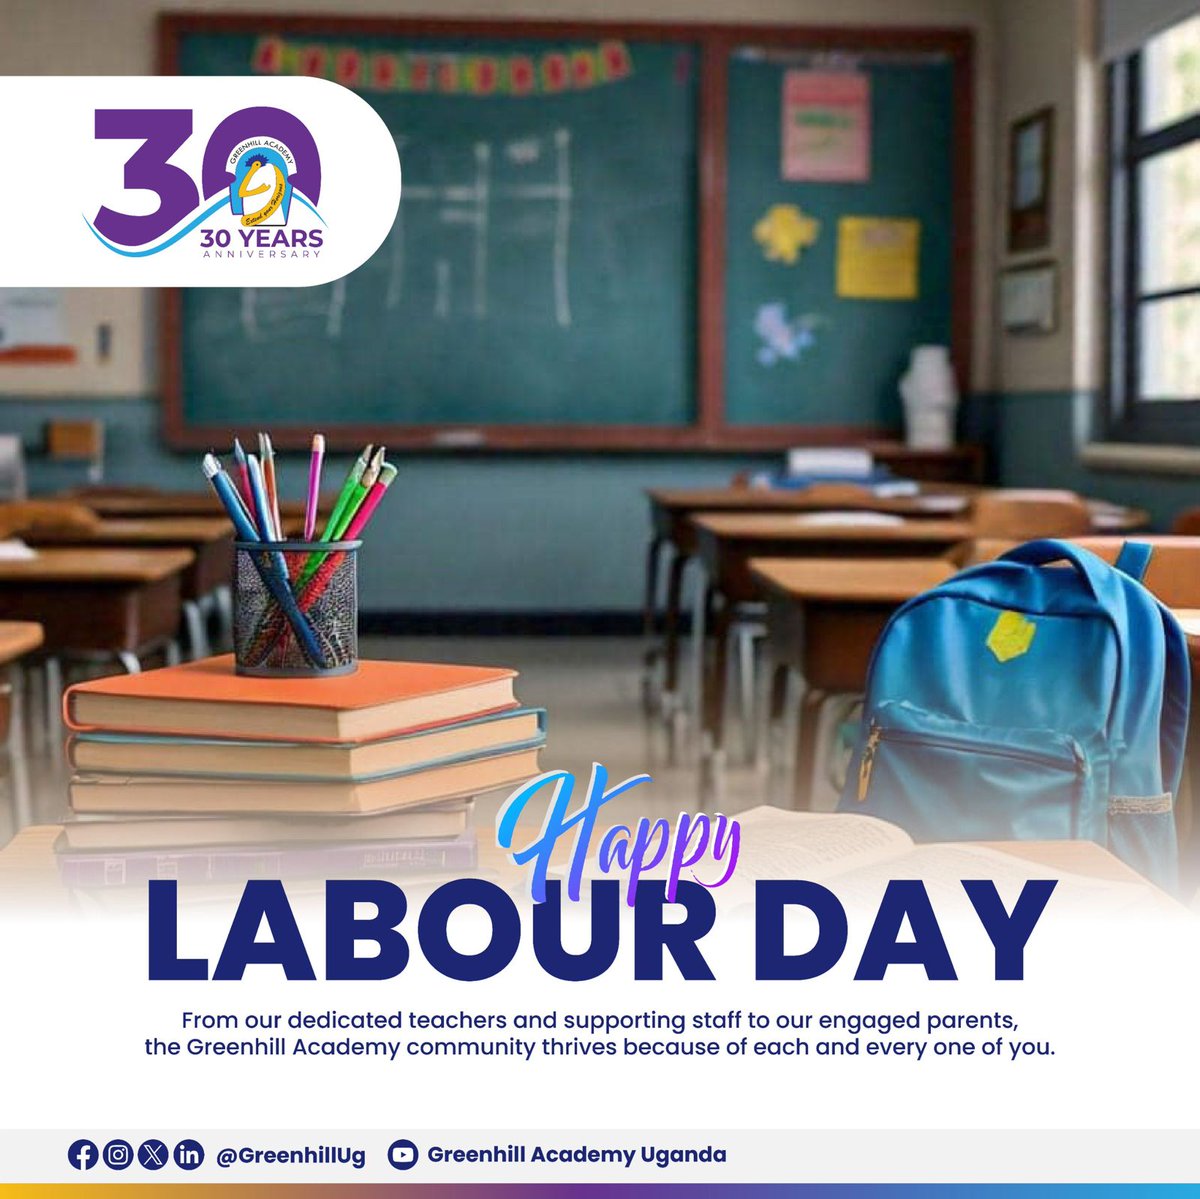 As we celebrate Labour Day, we at Greenhill Academy reflect on the past 30 years and all that we have accomplished together. We are grateful for our dedicated teachers and staff who have inspired and challenged our students, and for our engaged parents. 👩‍🏫👨‍🏫 #HappyLabourDay